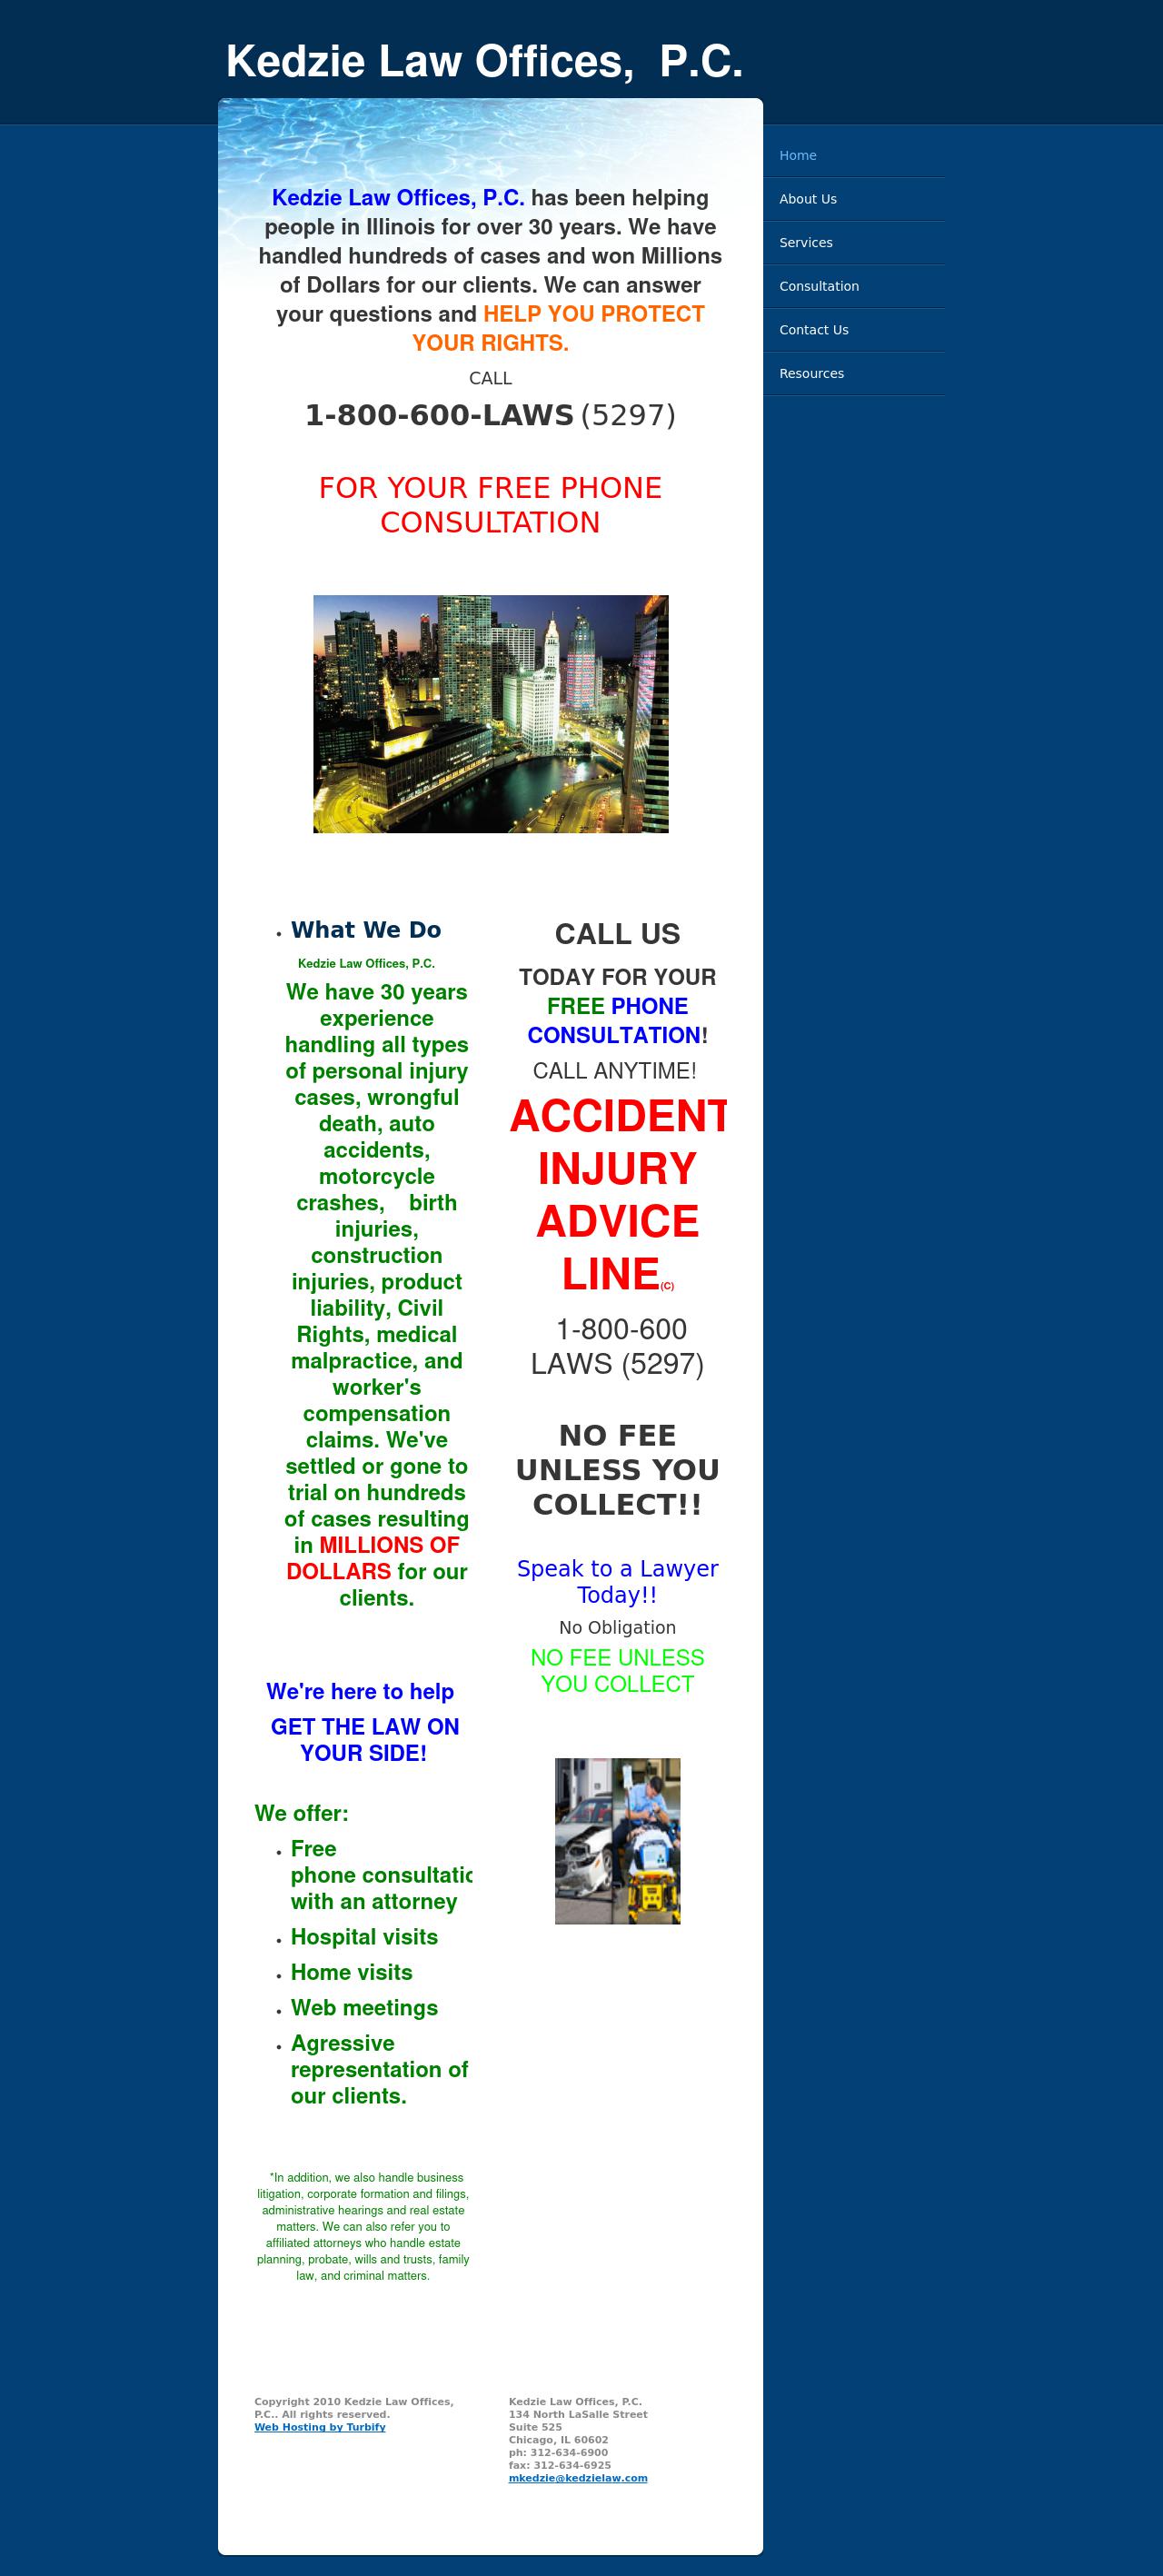 Accident Injury Advice Line - Chicago IL Lawyers